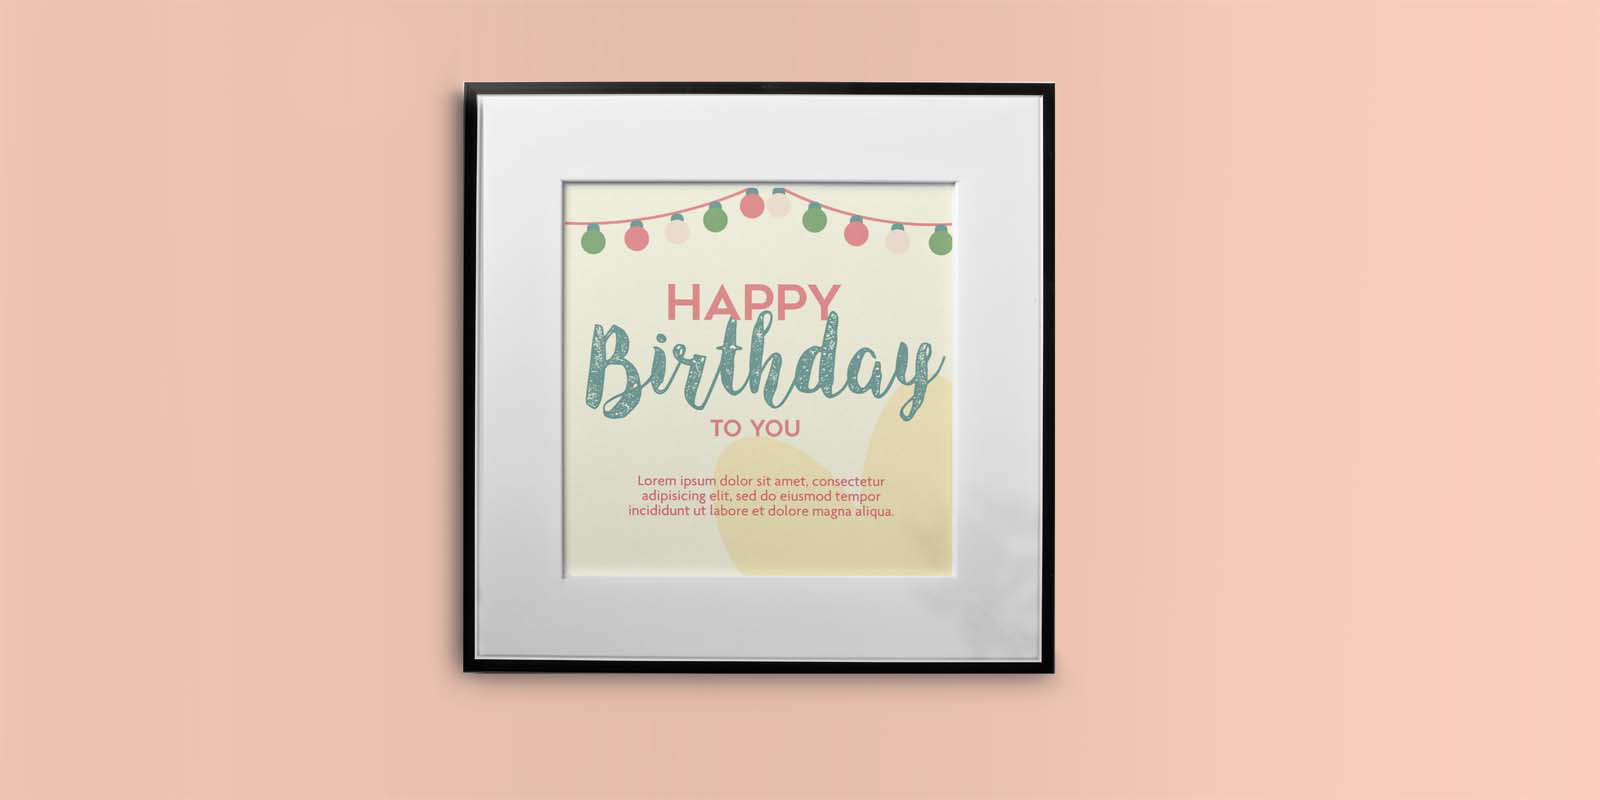 Birthday prints in Warsaw - Print with Pagerr